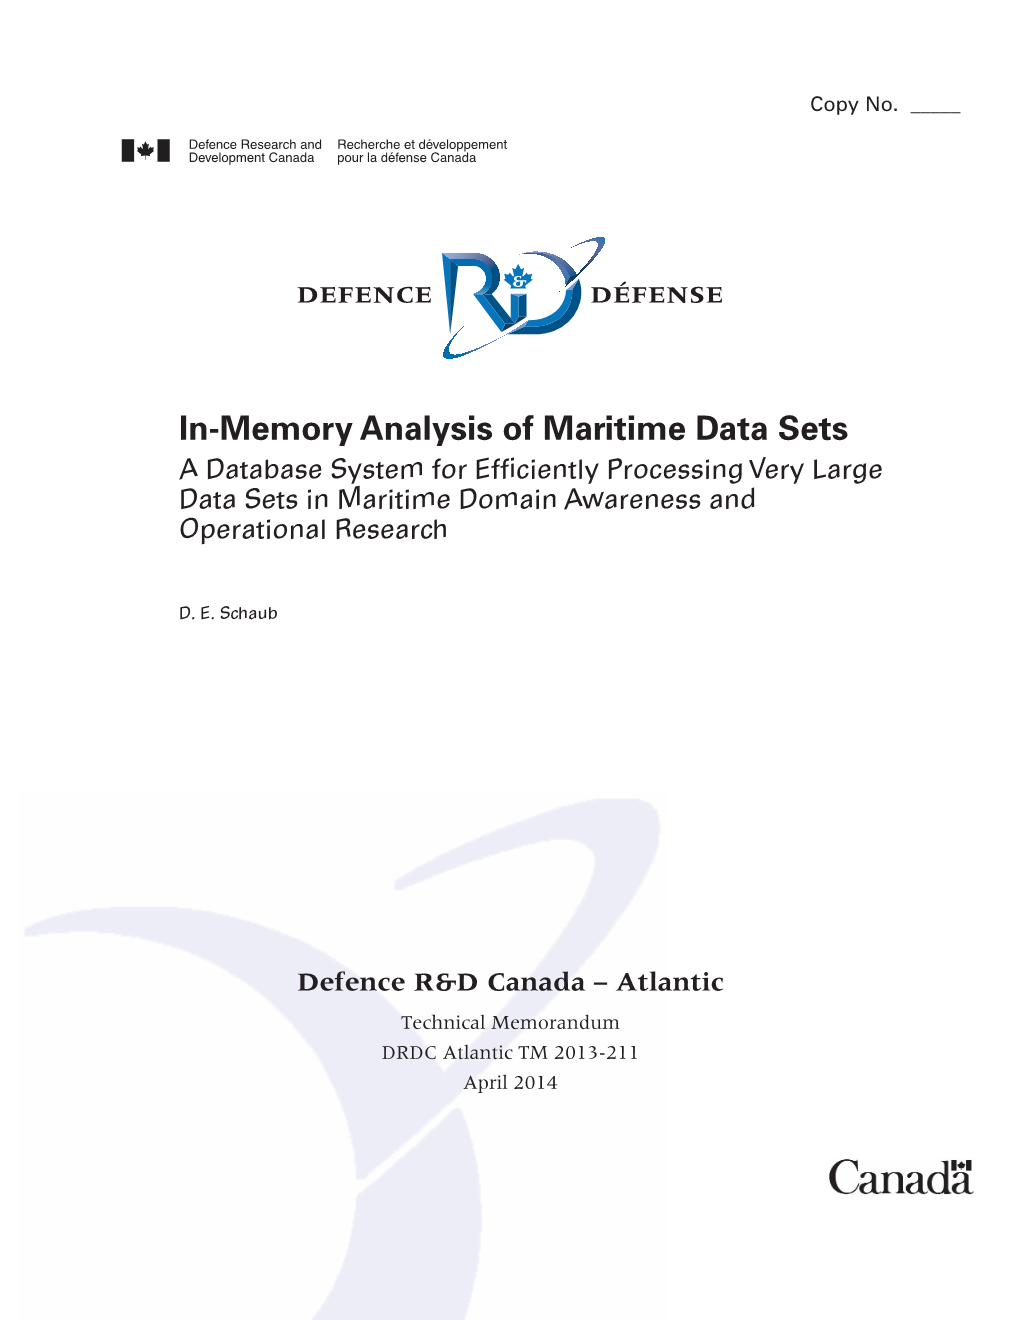 In-Memory Analysis of Maritime Data Sets a Database System for Efﬁciently Processing Very Large Data Sets in Maritime Domain Awareness and Operational Research